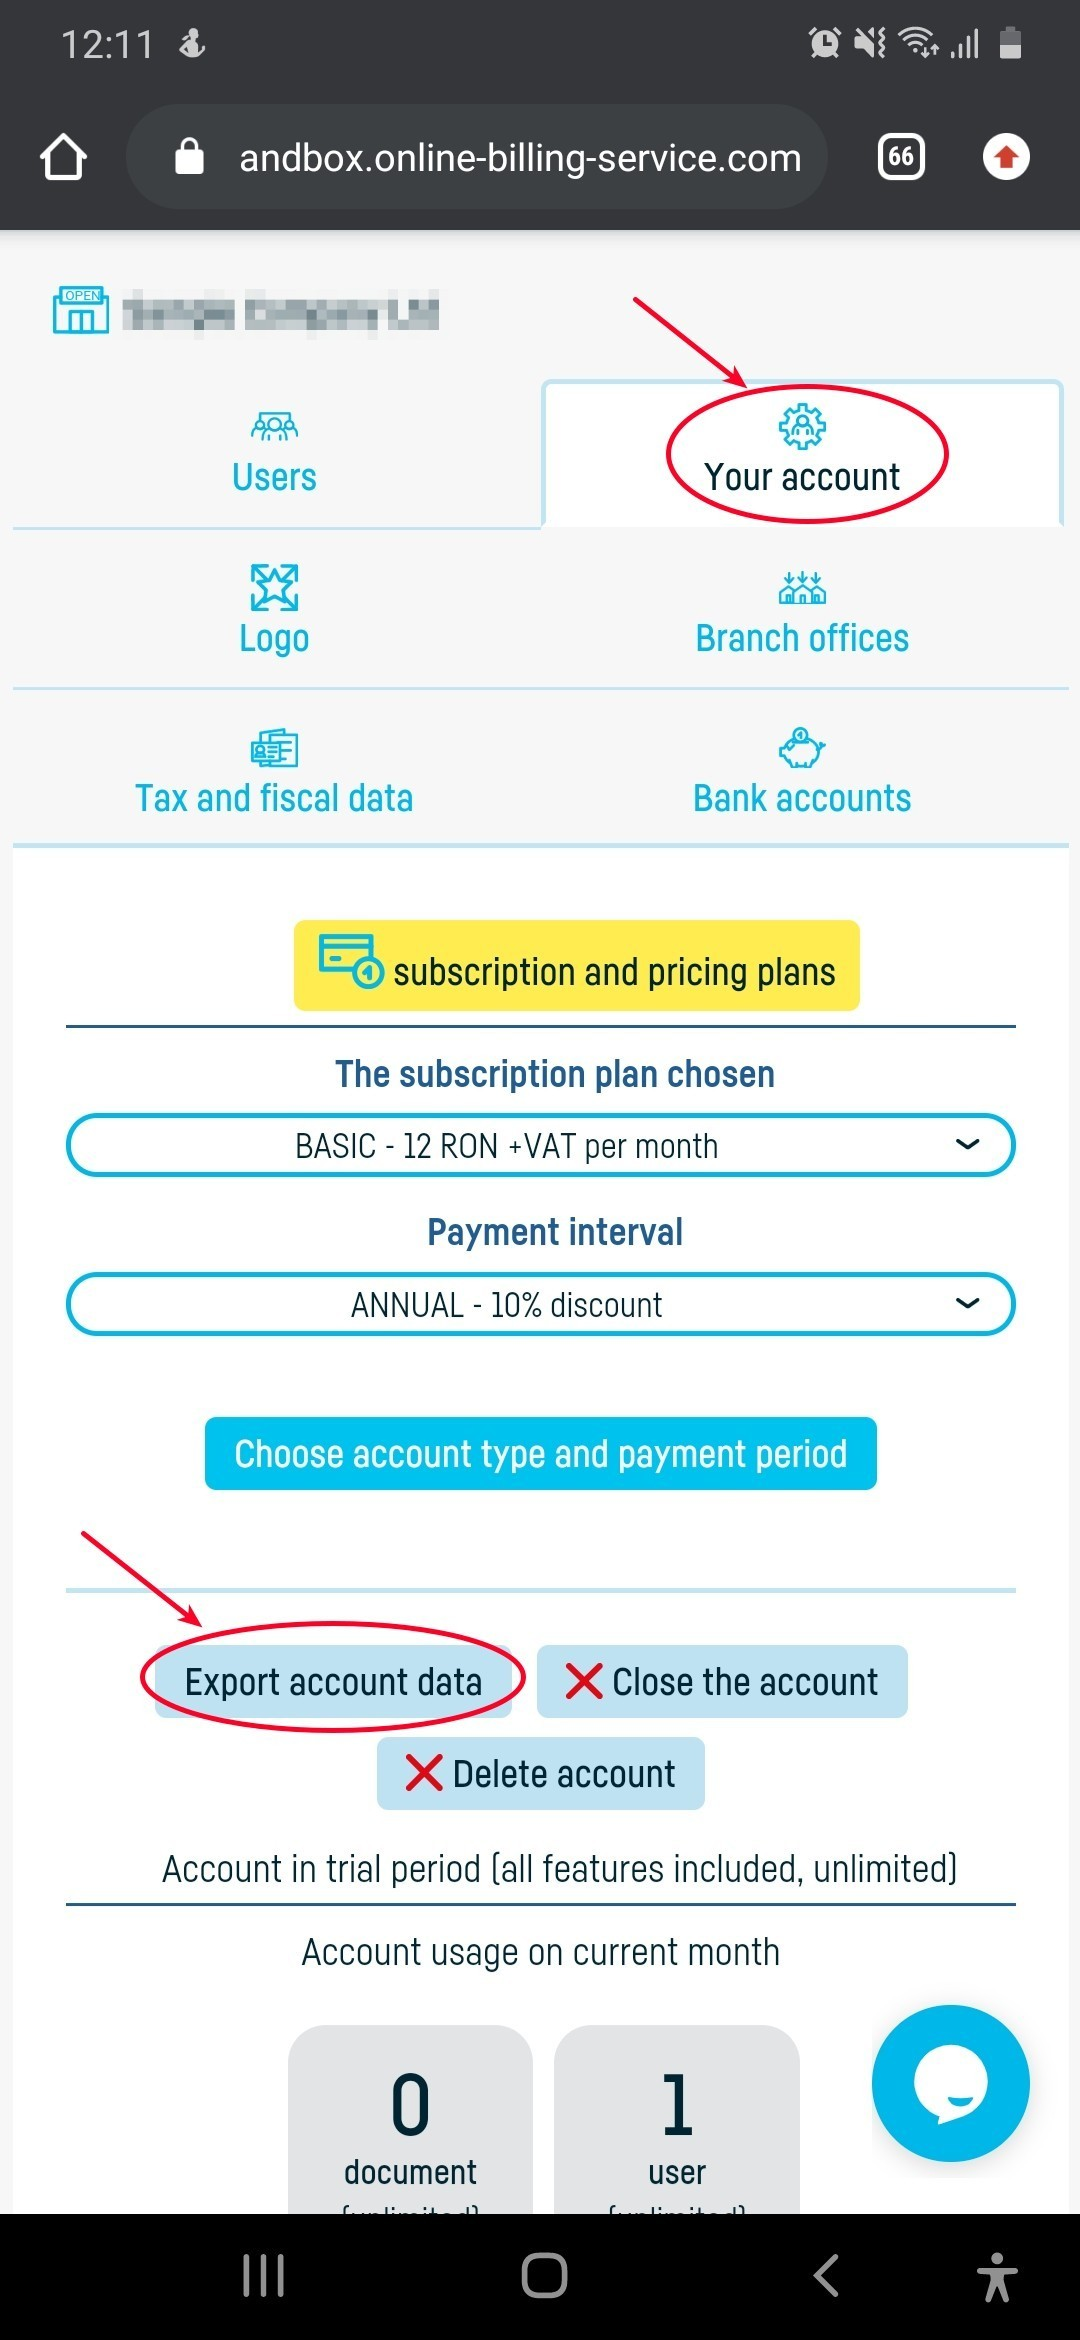 How do I export the data associated with my account? - step 4